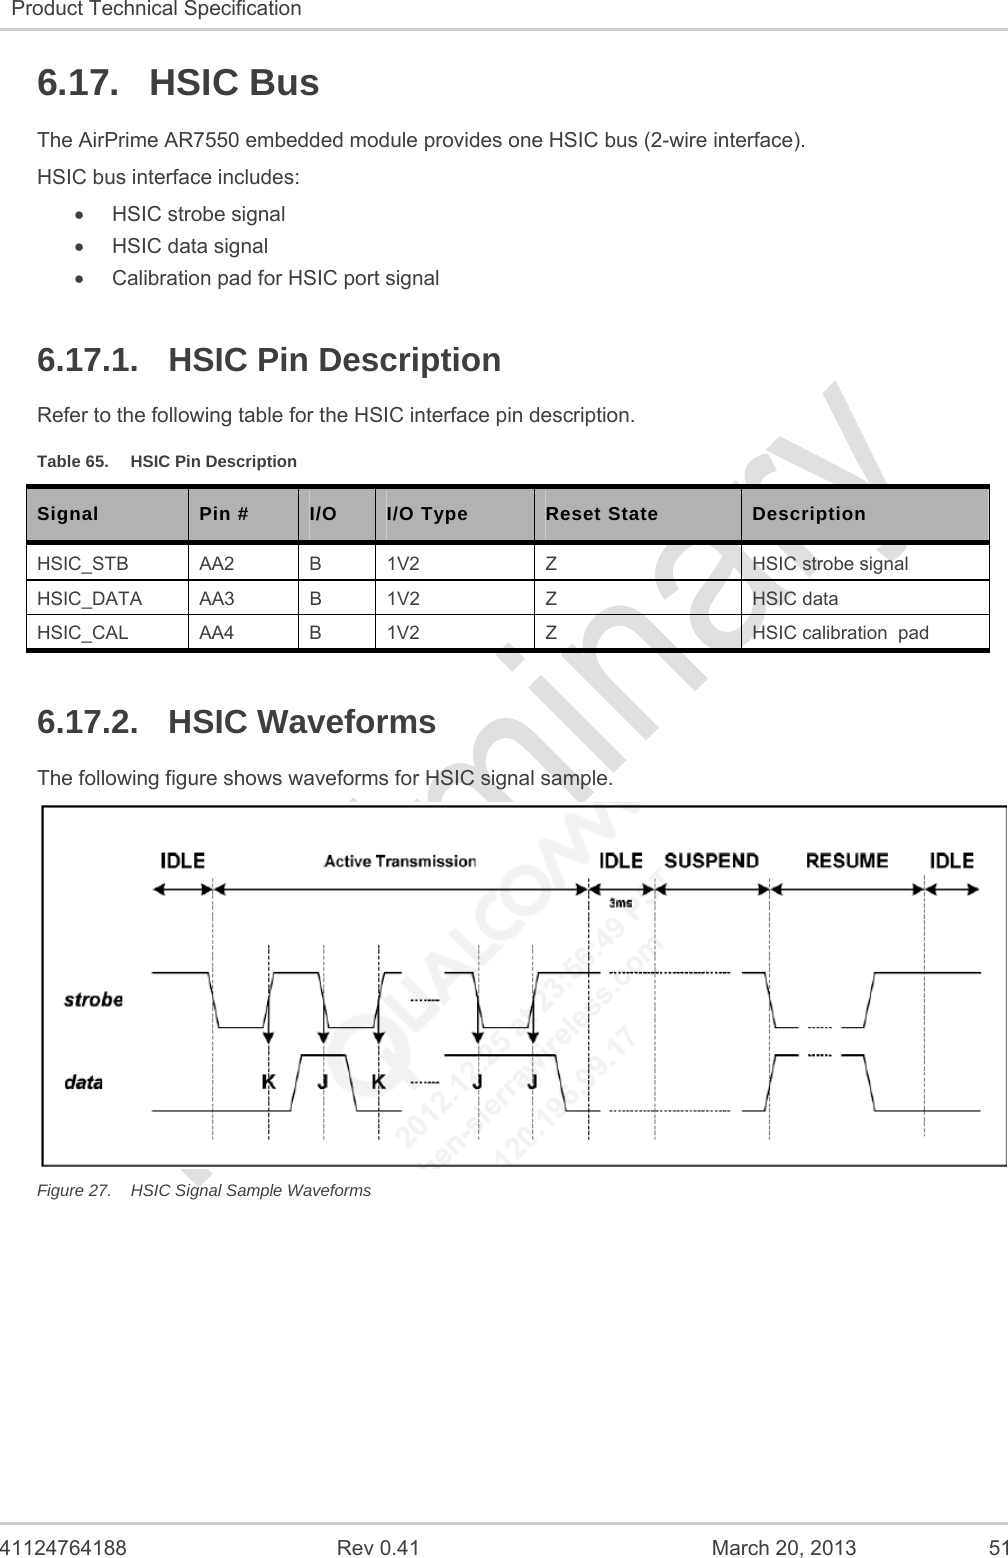   41124764188  Rev 0.41  March 20, 2013  51 Product Technical Specification   6.17. HSIC Bus The AirPrime AR7550 embedded module provides one HSIC bus (2-wire interface). HSIC bus interface includes:  HSIC strobe signal  HSIC data signal   Calibration pad for HSIC port signal 6.17.1.  HSIC Pin Description Refer to the following table for the HSIC interface pin description. Table 65.  HSIC Pin Description Signal  Pin #  I/O  I/O Type  Reset State  Description HSIC_STB  AA2  B  1V2  Z  HSIC strobe signal HSIC_DATA AA3  B  1V2  Z  HSIC data  HSIC_CAL  AA4  B  1V2  Z  HSIC calibration  pad 6.17.2. HSIC Waveforms The following figure shows waveforms for HSIC signal sample.  Figure 27.  HSIC Signal Sample Waveforms   